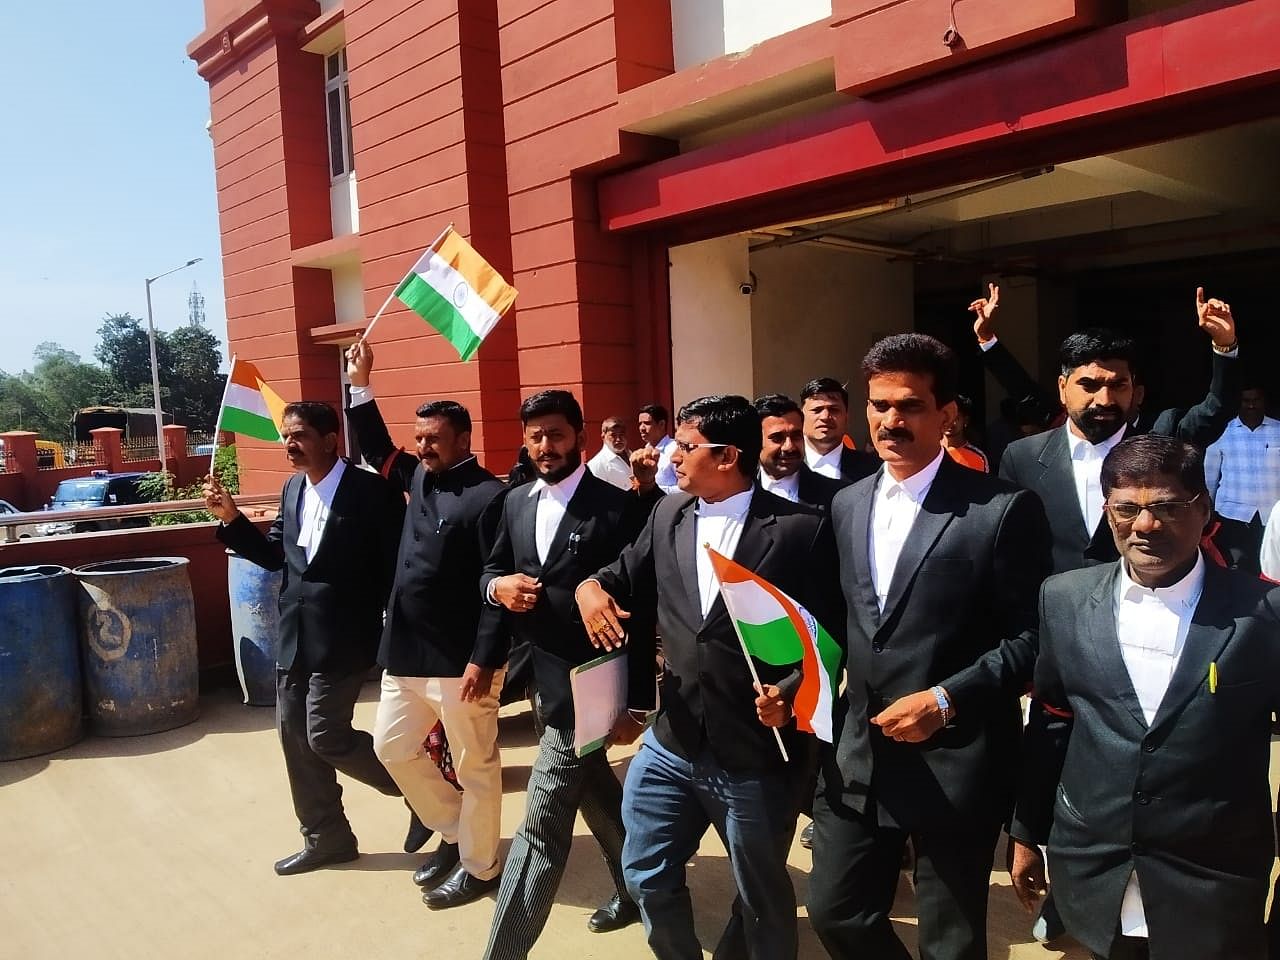 A group of local advocates raised ‘Bharat Mata Ki Jai’ slogans and displayed tricolours when advocates from Bengaluru visited the court complex. (DH Photo)